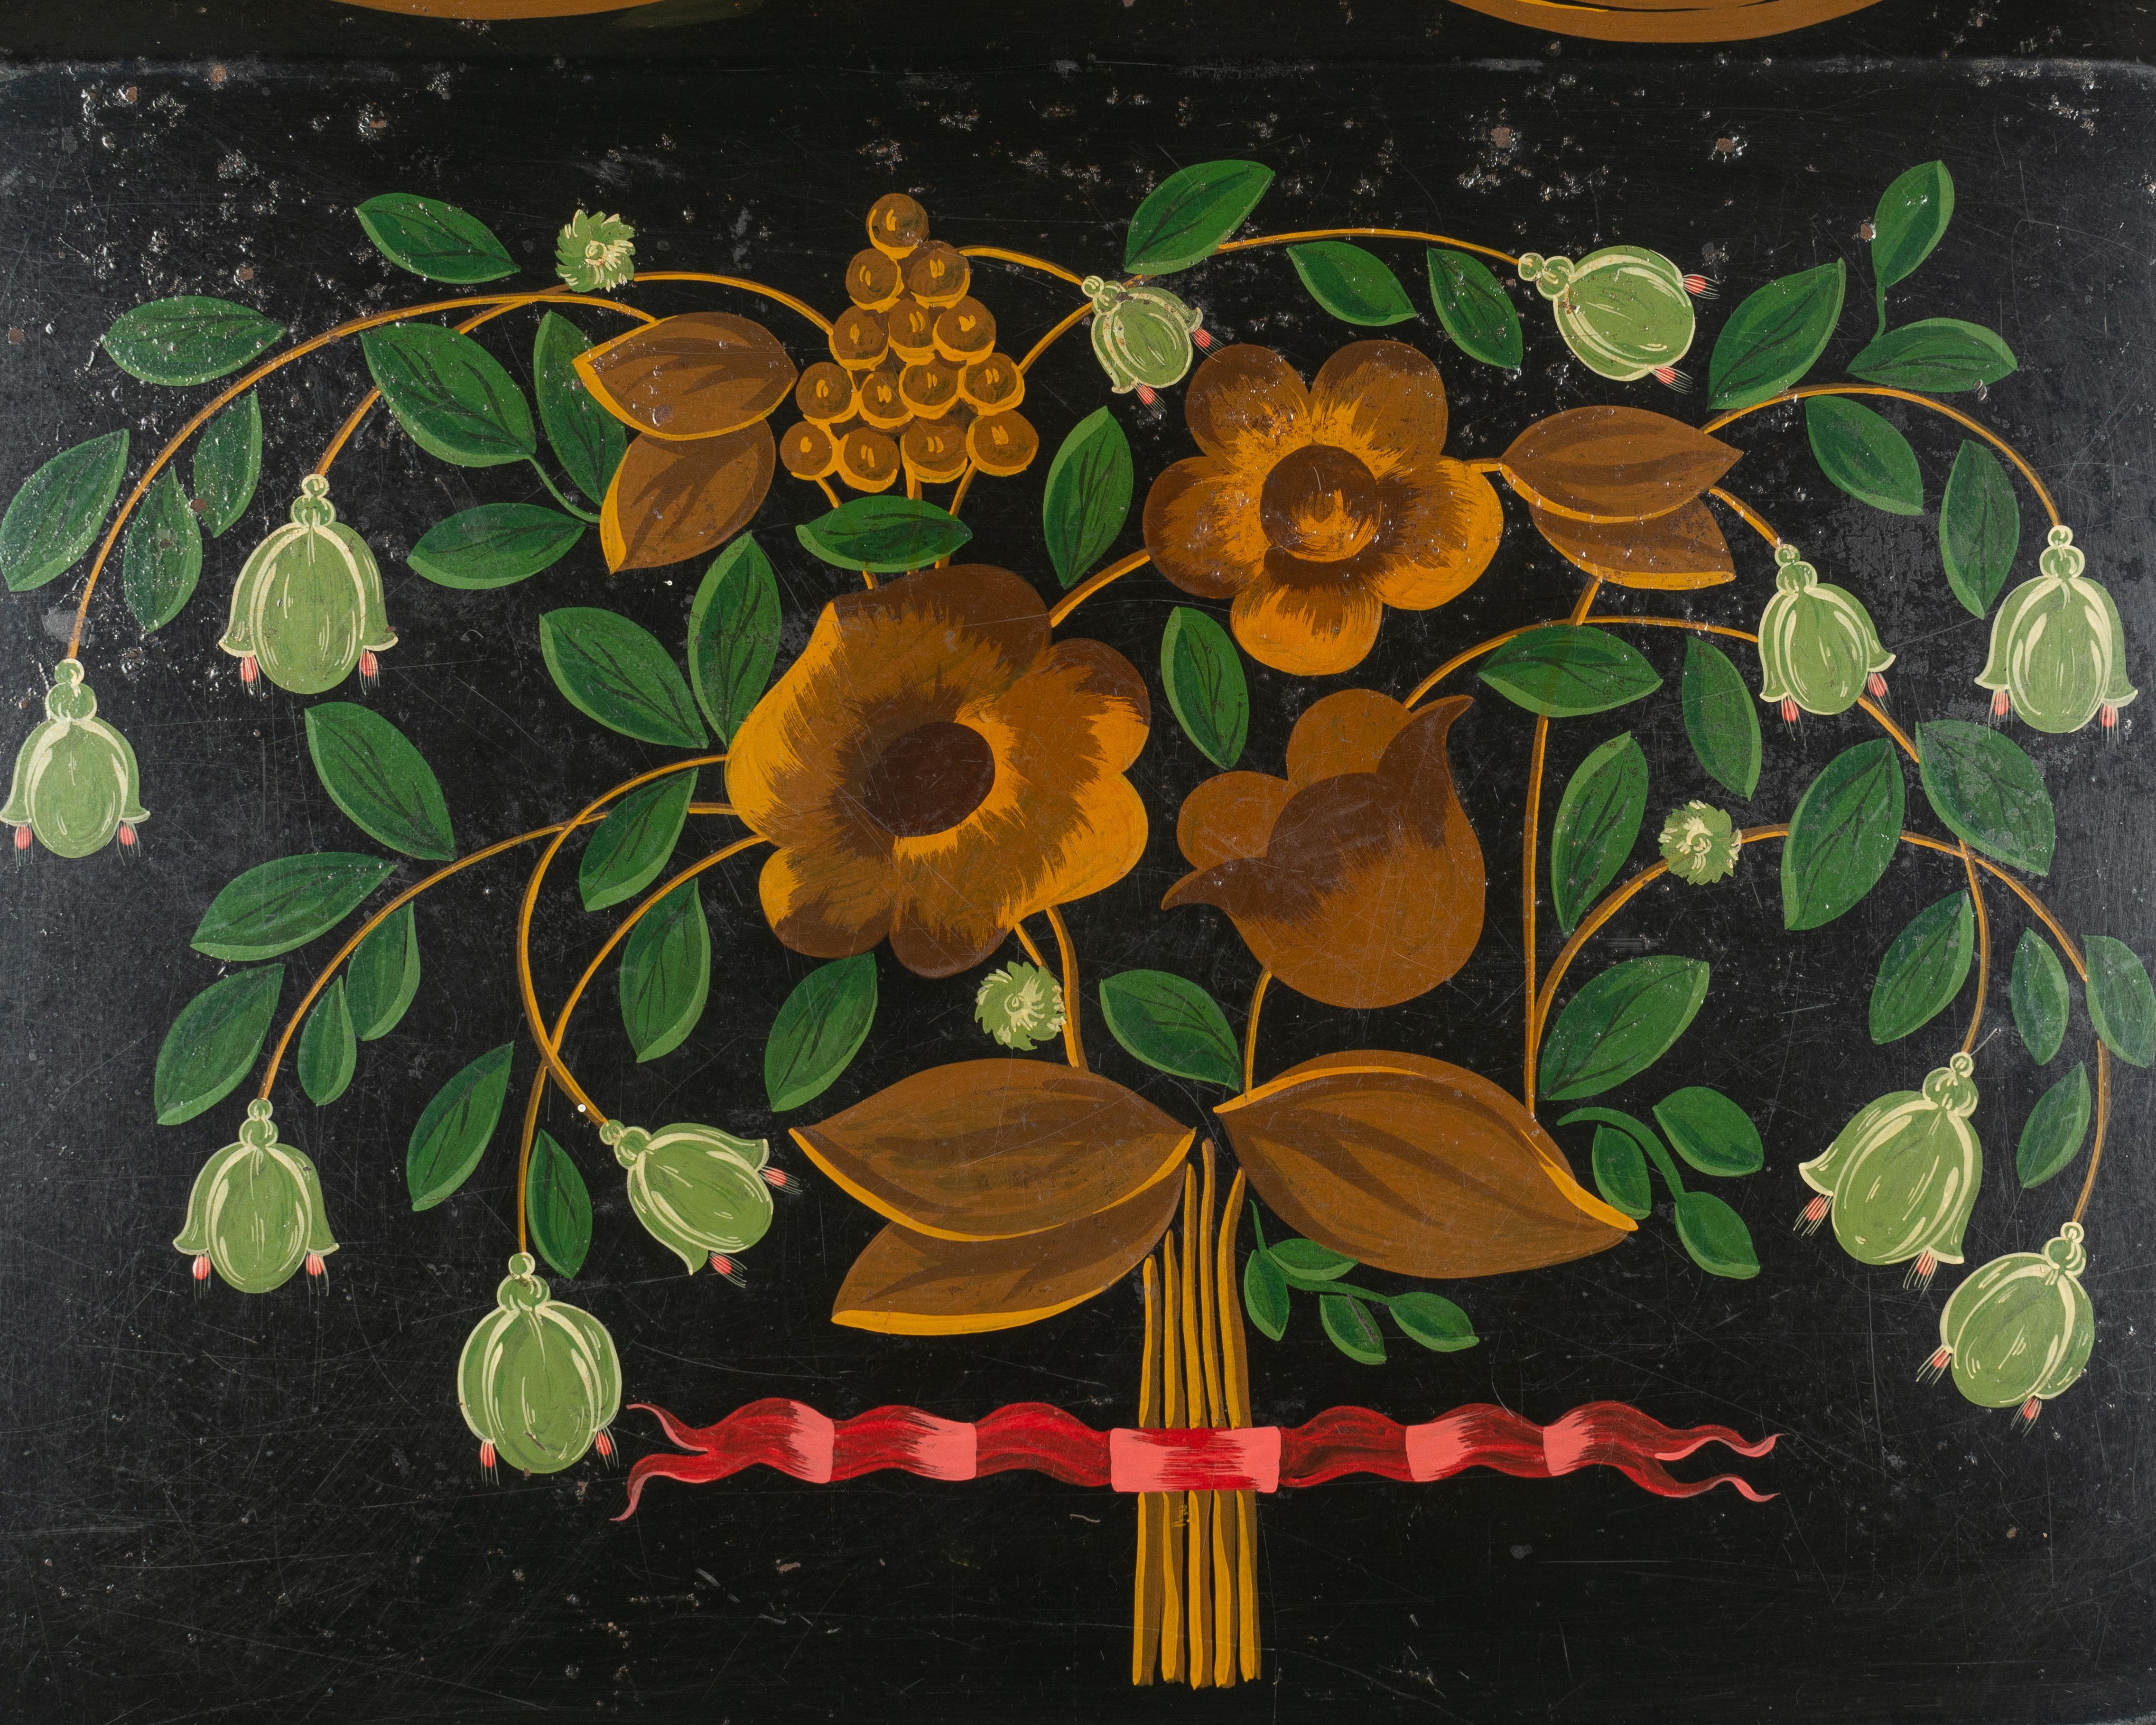 A 19th century French Napoleon III large handled tole serving tray with colorful hand painted floral bouquet in orange and green tied with a red ribbon on a black ground. Felted on the bottom. In good condition considering the age.